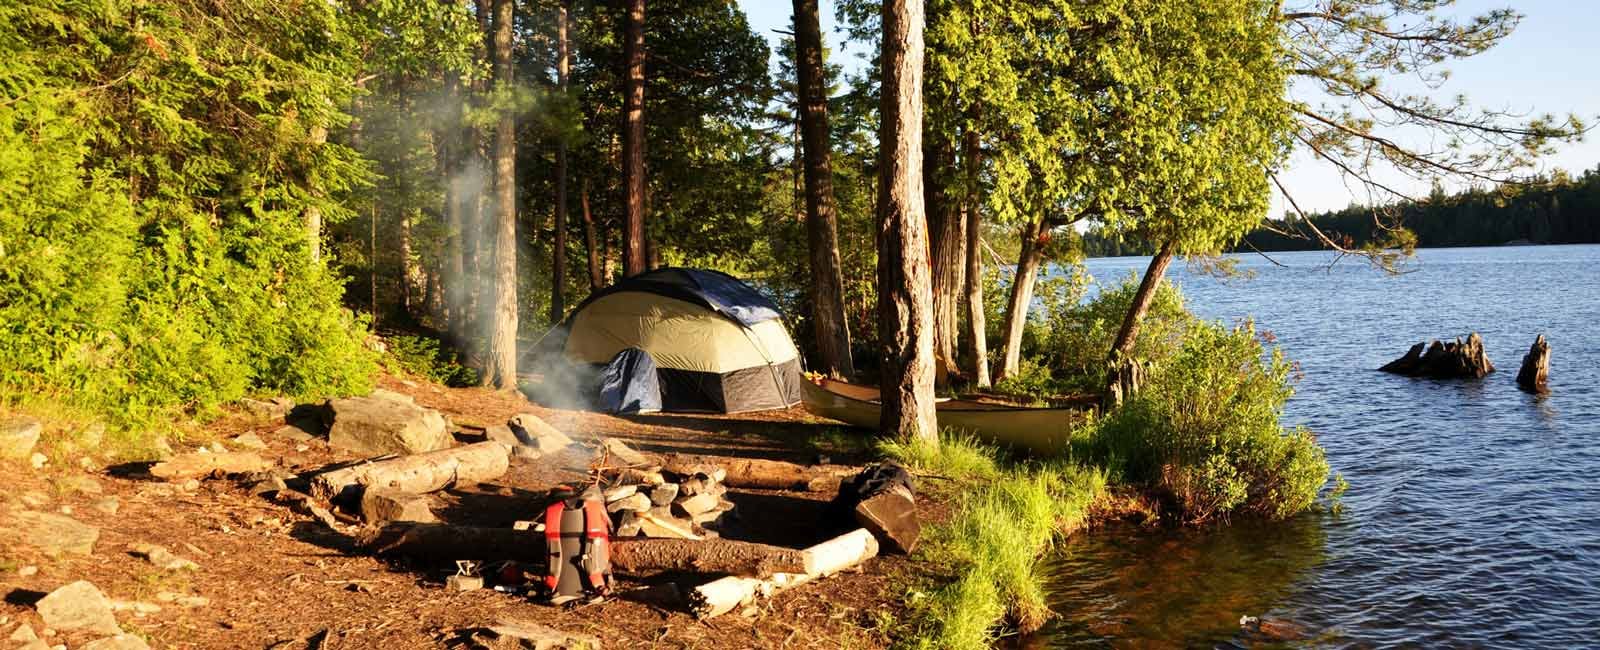 Holiday Gift Guide: Camping Products